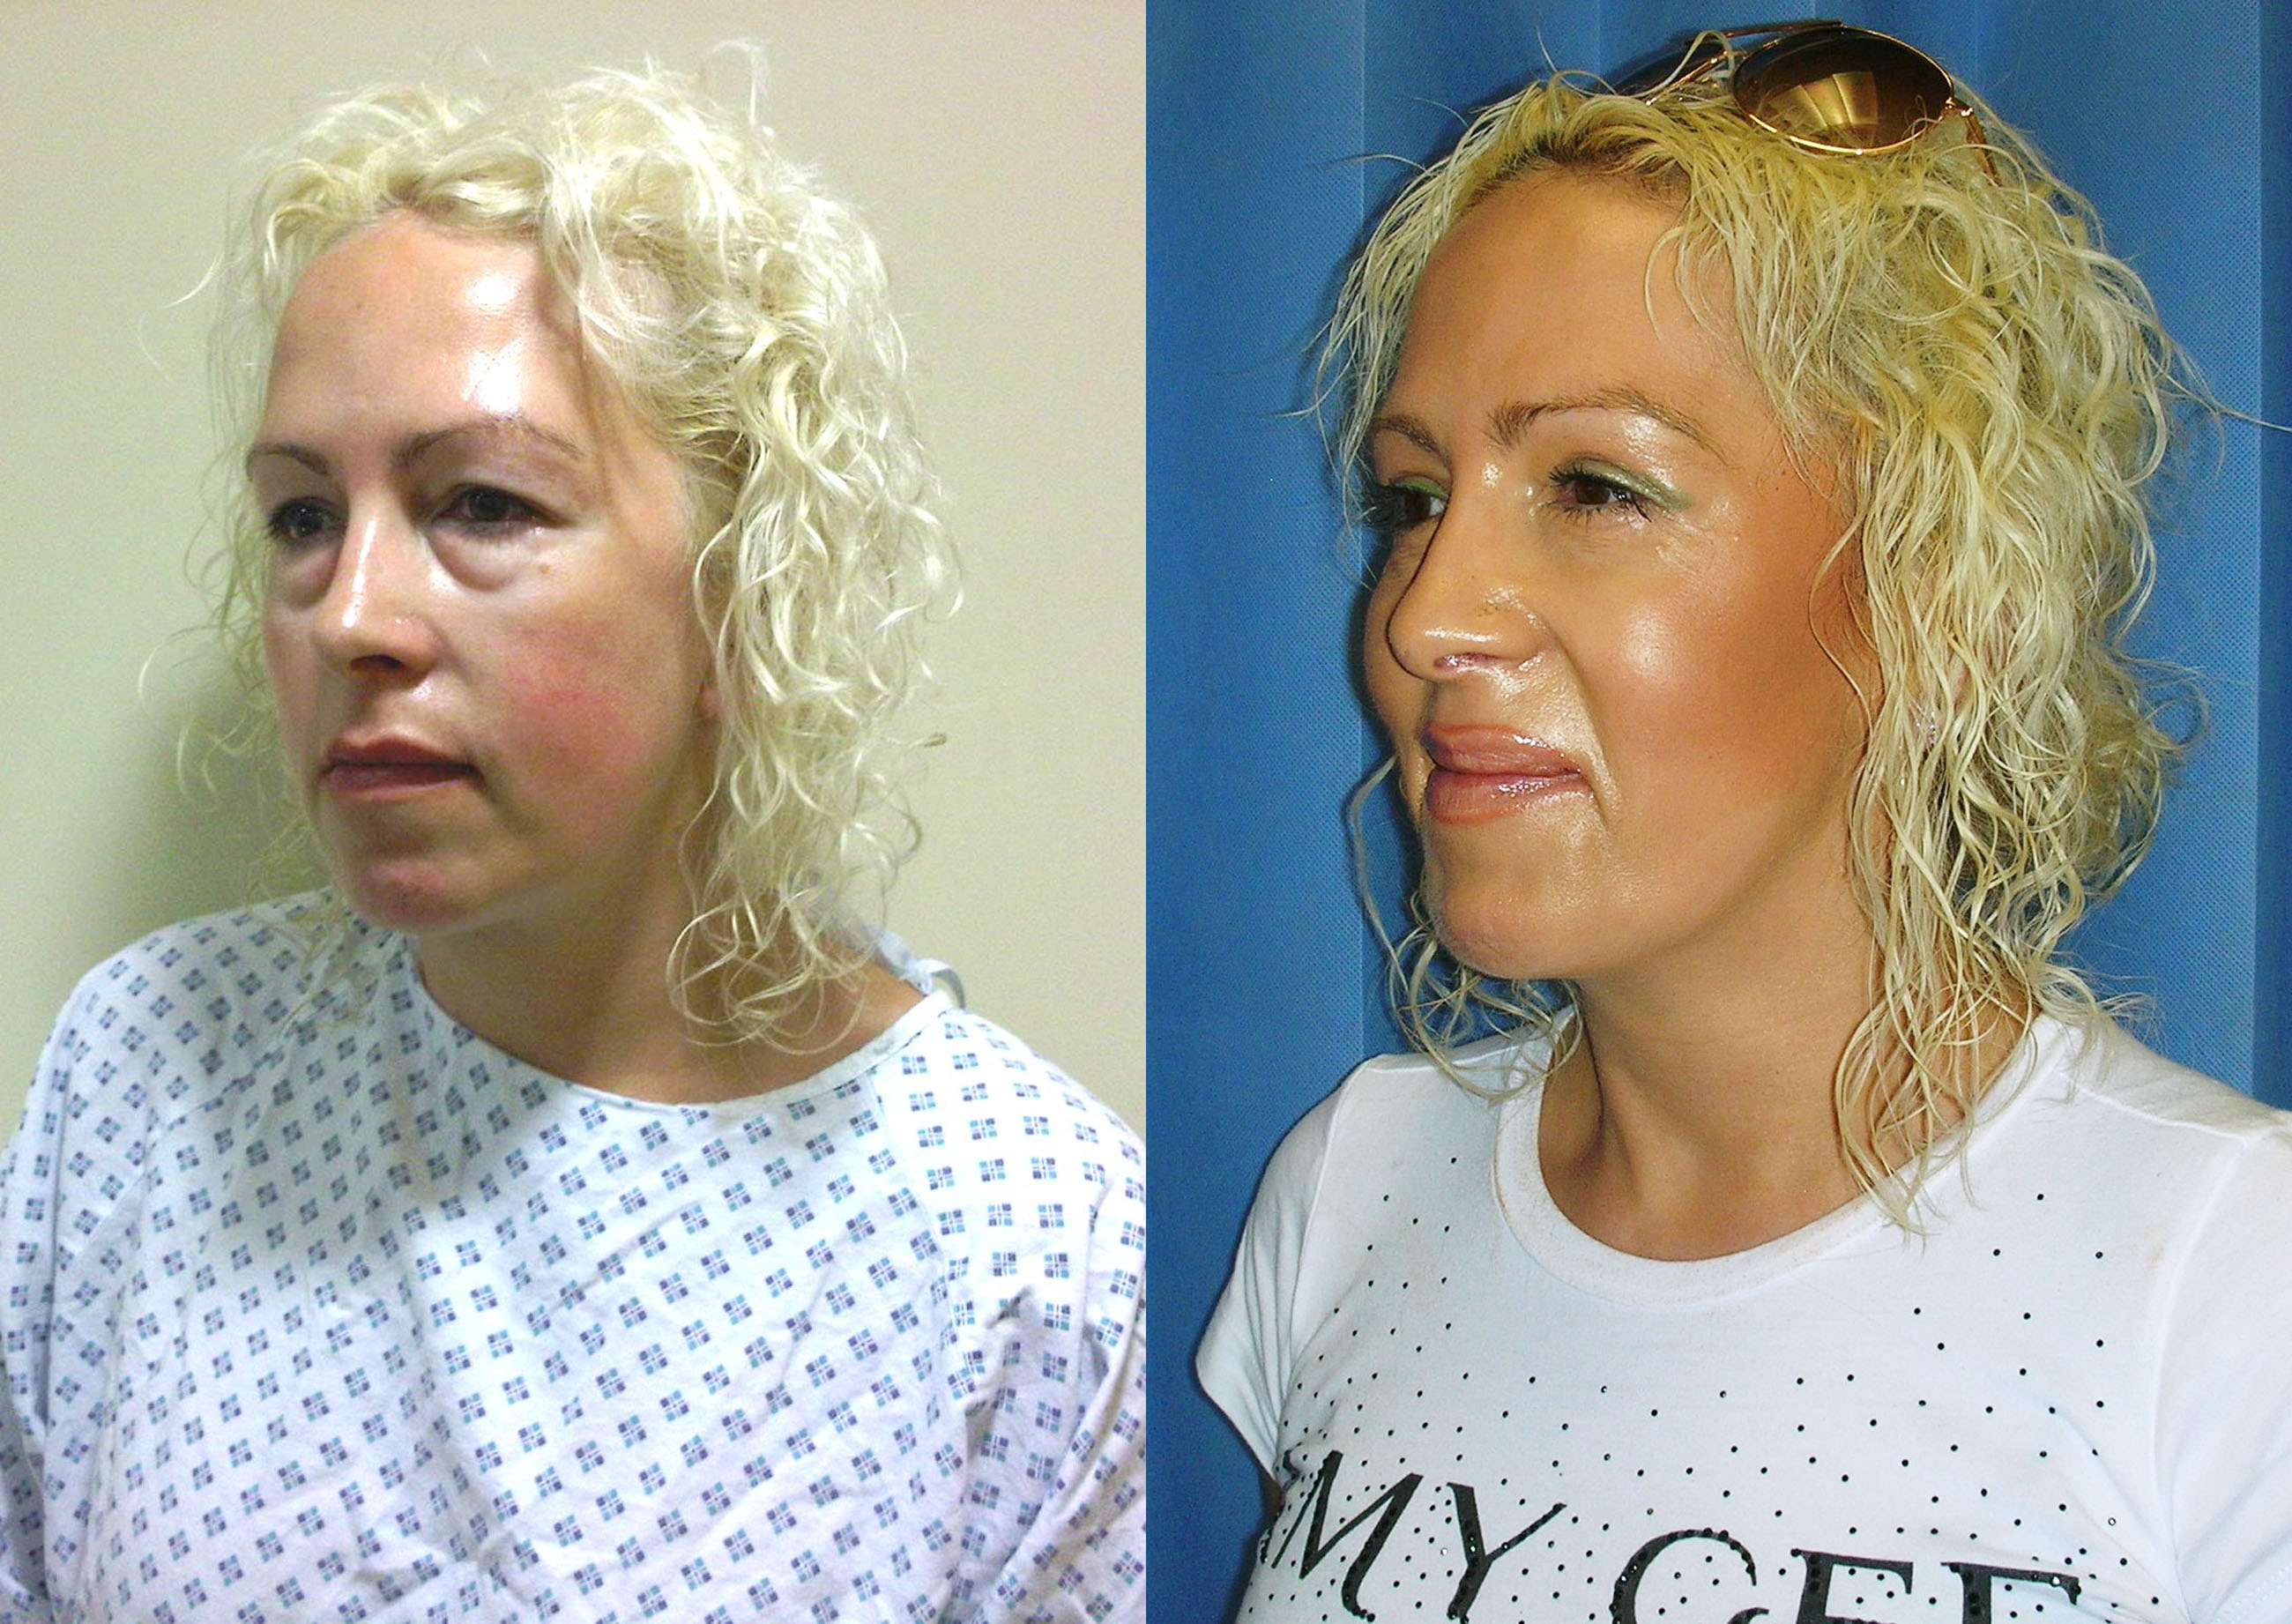 Eyelid Surgery Before and Afters